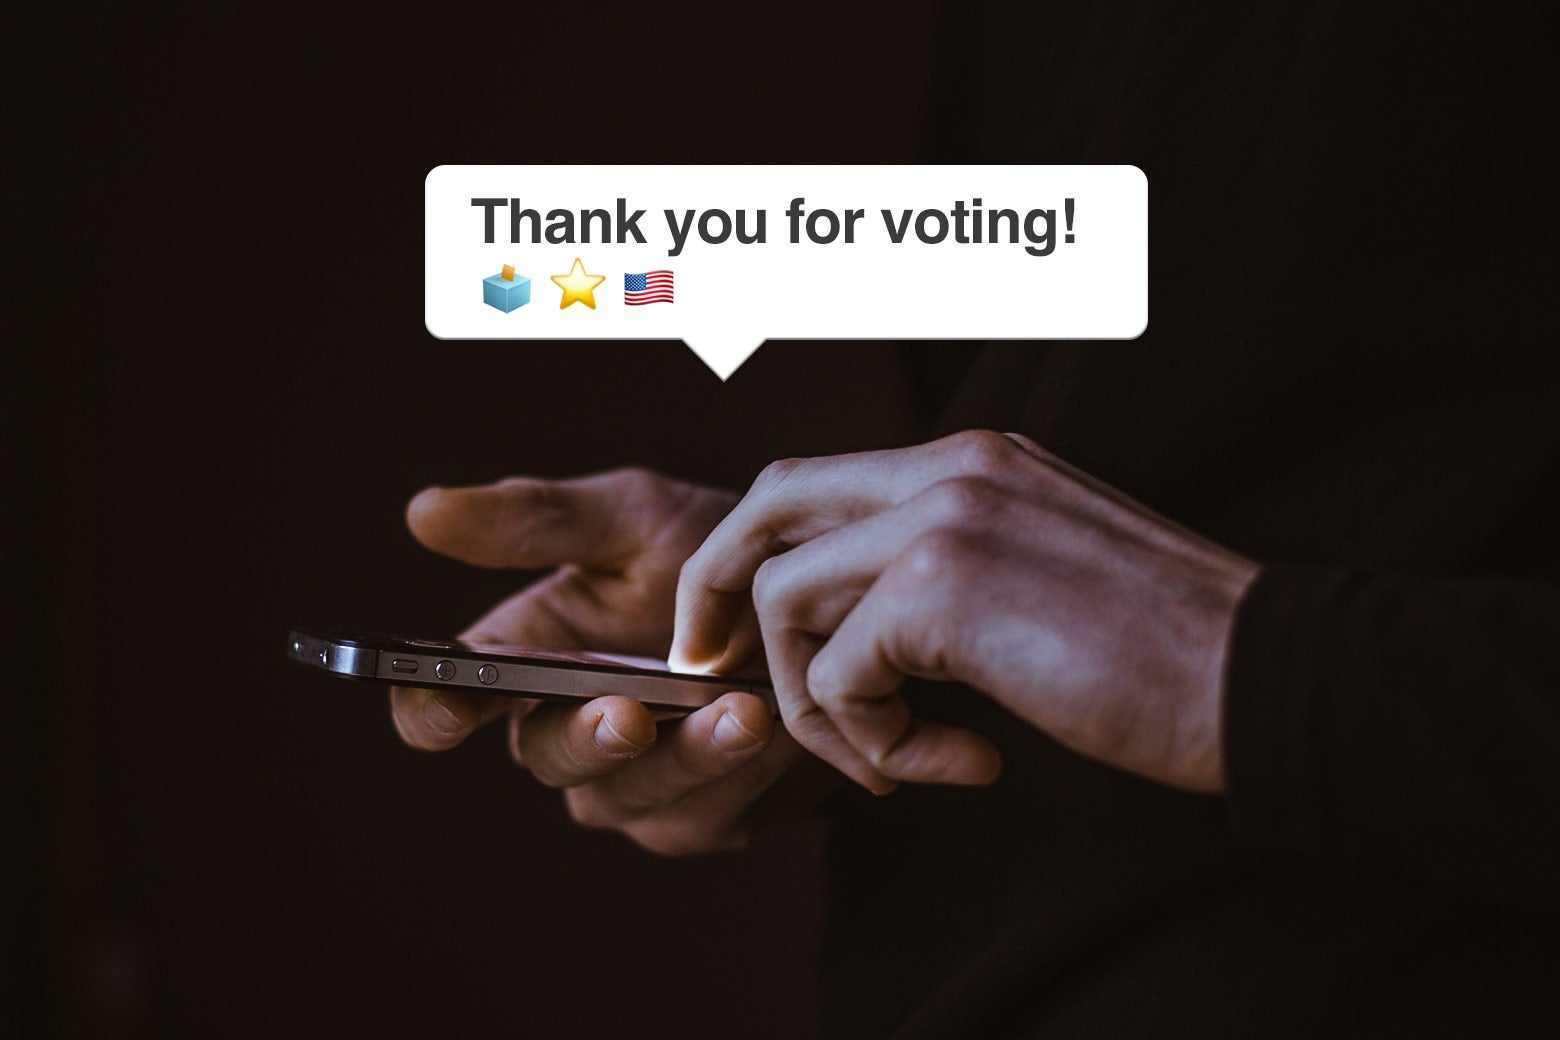 Two hands hold a phone, with a text bubble that says "Thank you for voting!" followed by ballot box, star, and U.S. flag emojis.